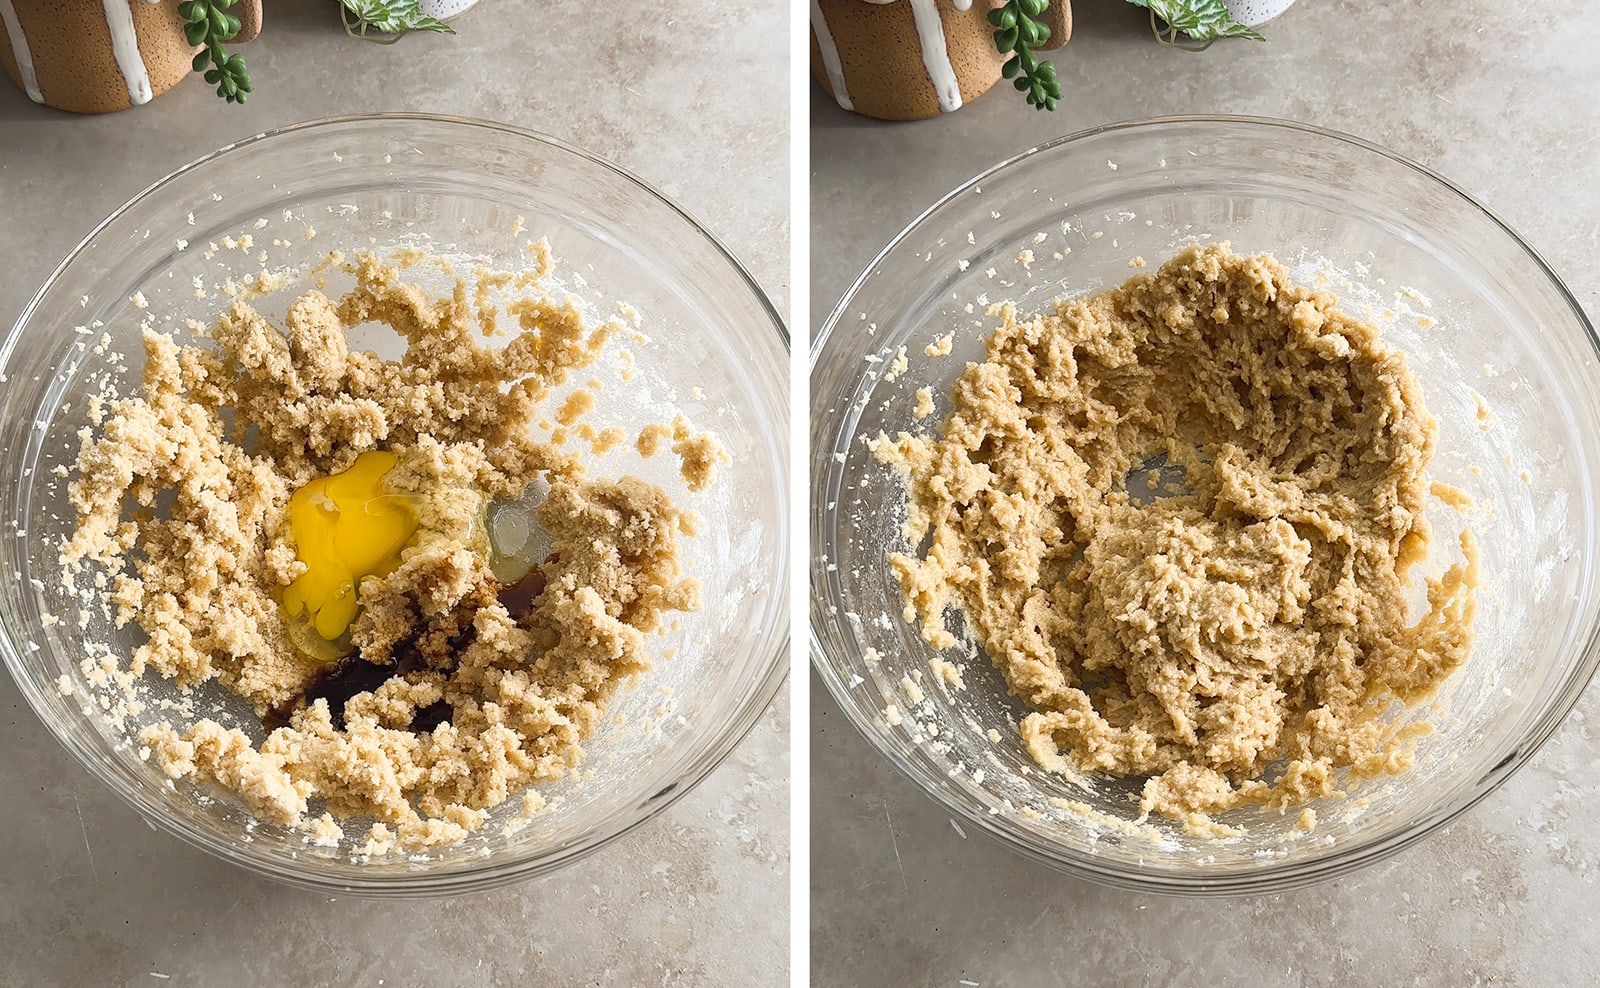 Left to right: an egg in a bowl of cookie dough, cookie dough batter in a mixing bowl.